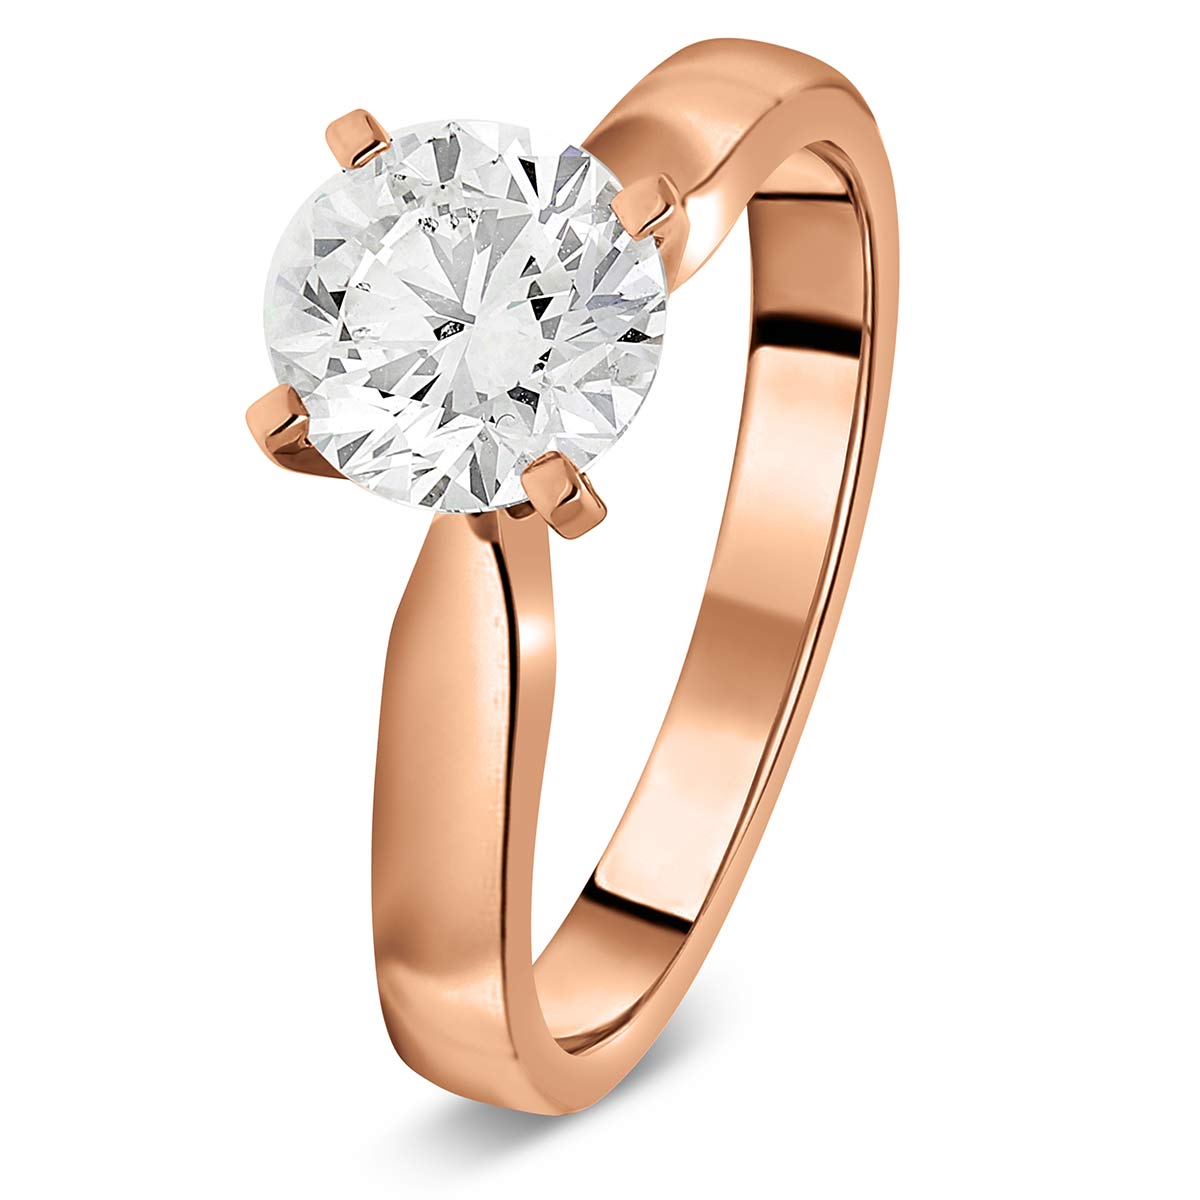 bahamas-or-solitaires-diamants-certifies-style-classique-or-rose-750-